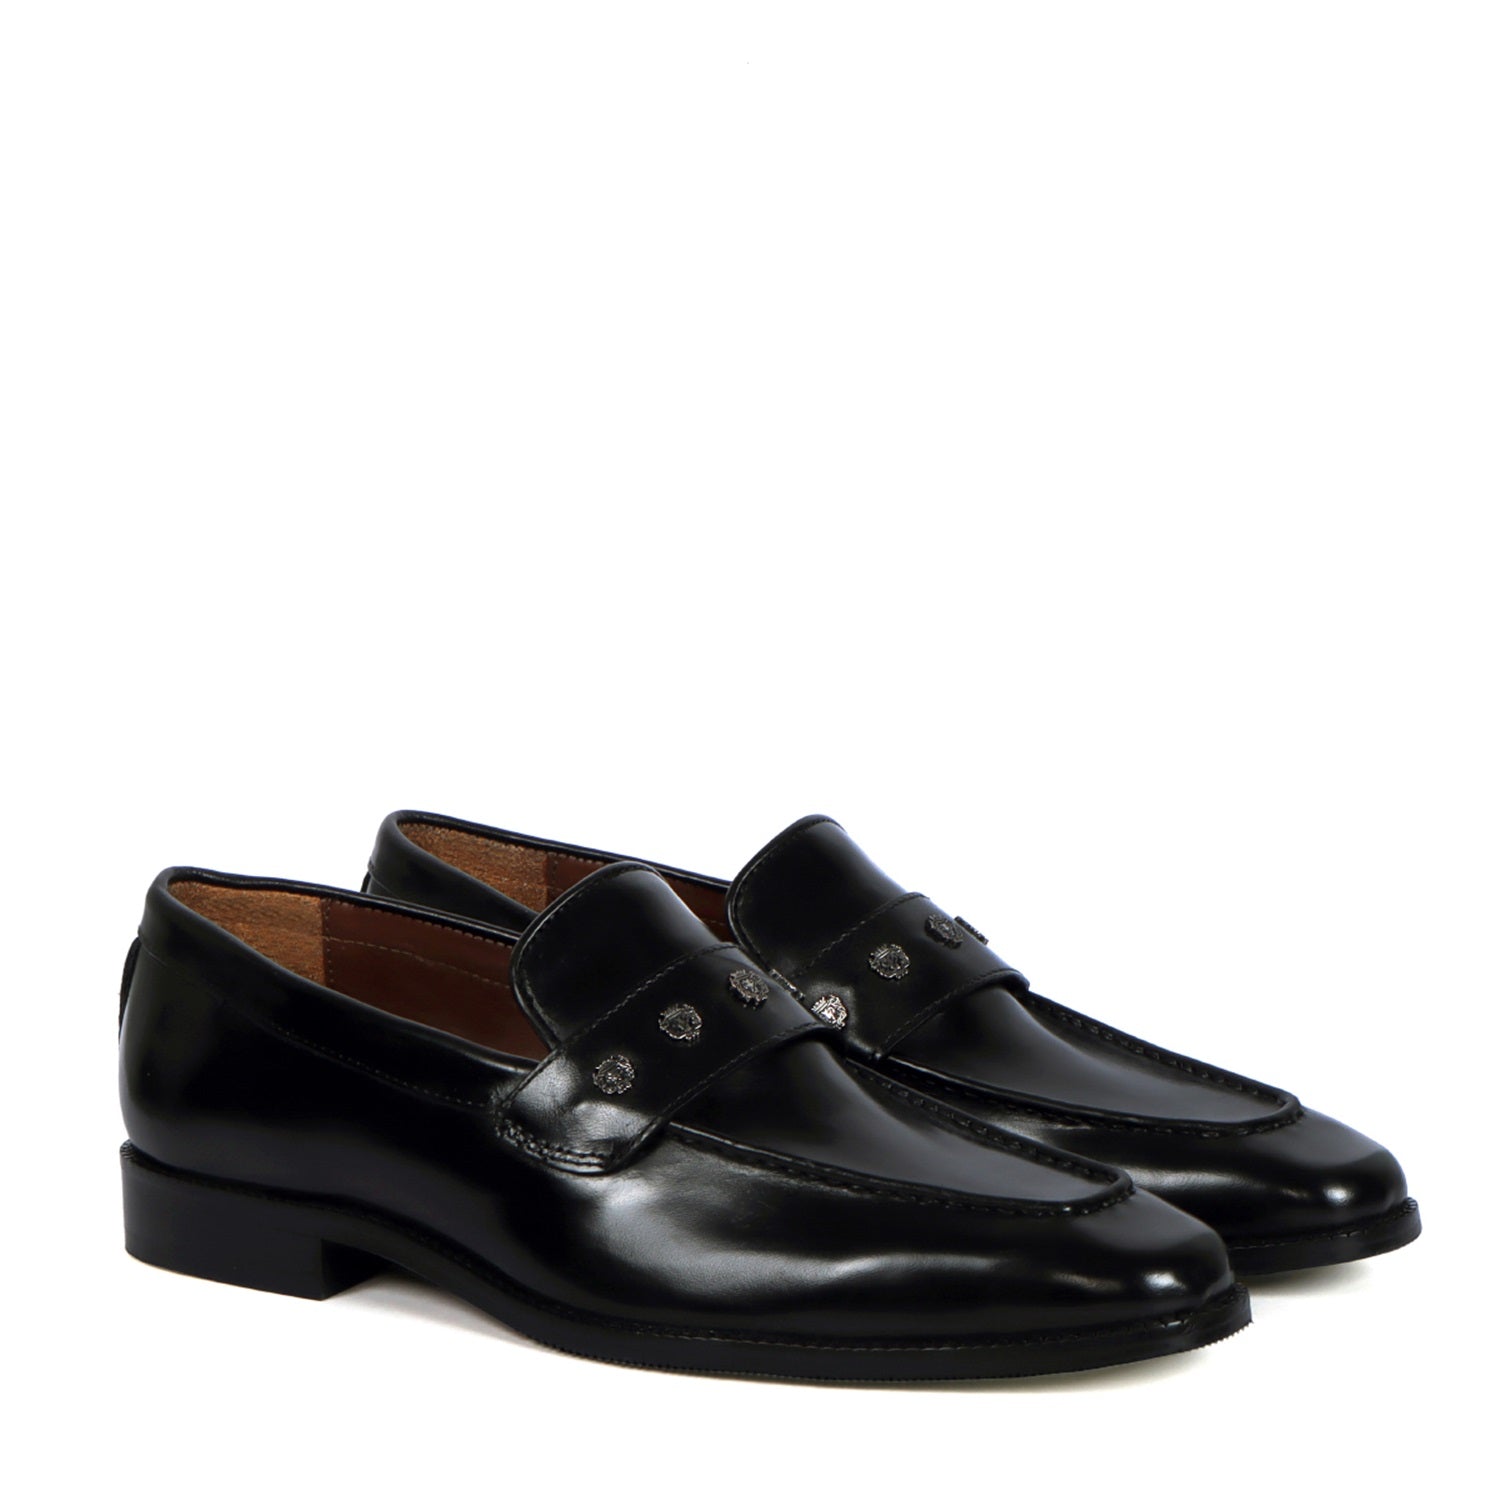 Handmade Penny Loafer Black Formal Slip-On Shoes with Mini Lion